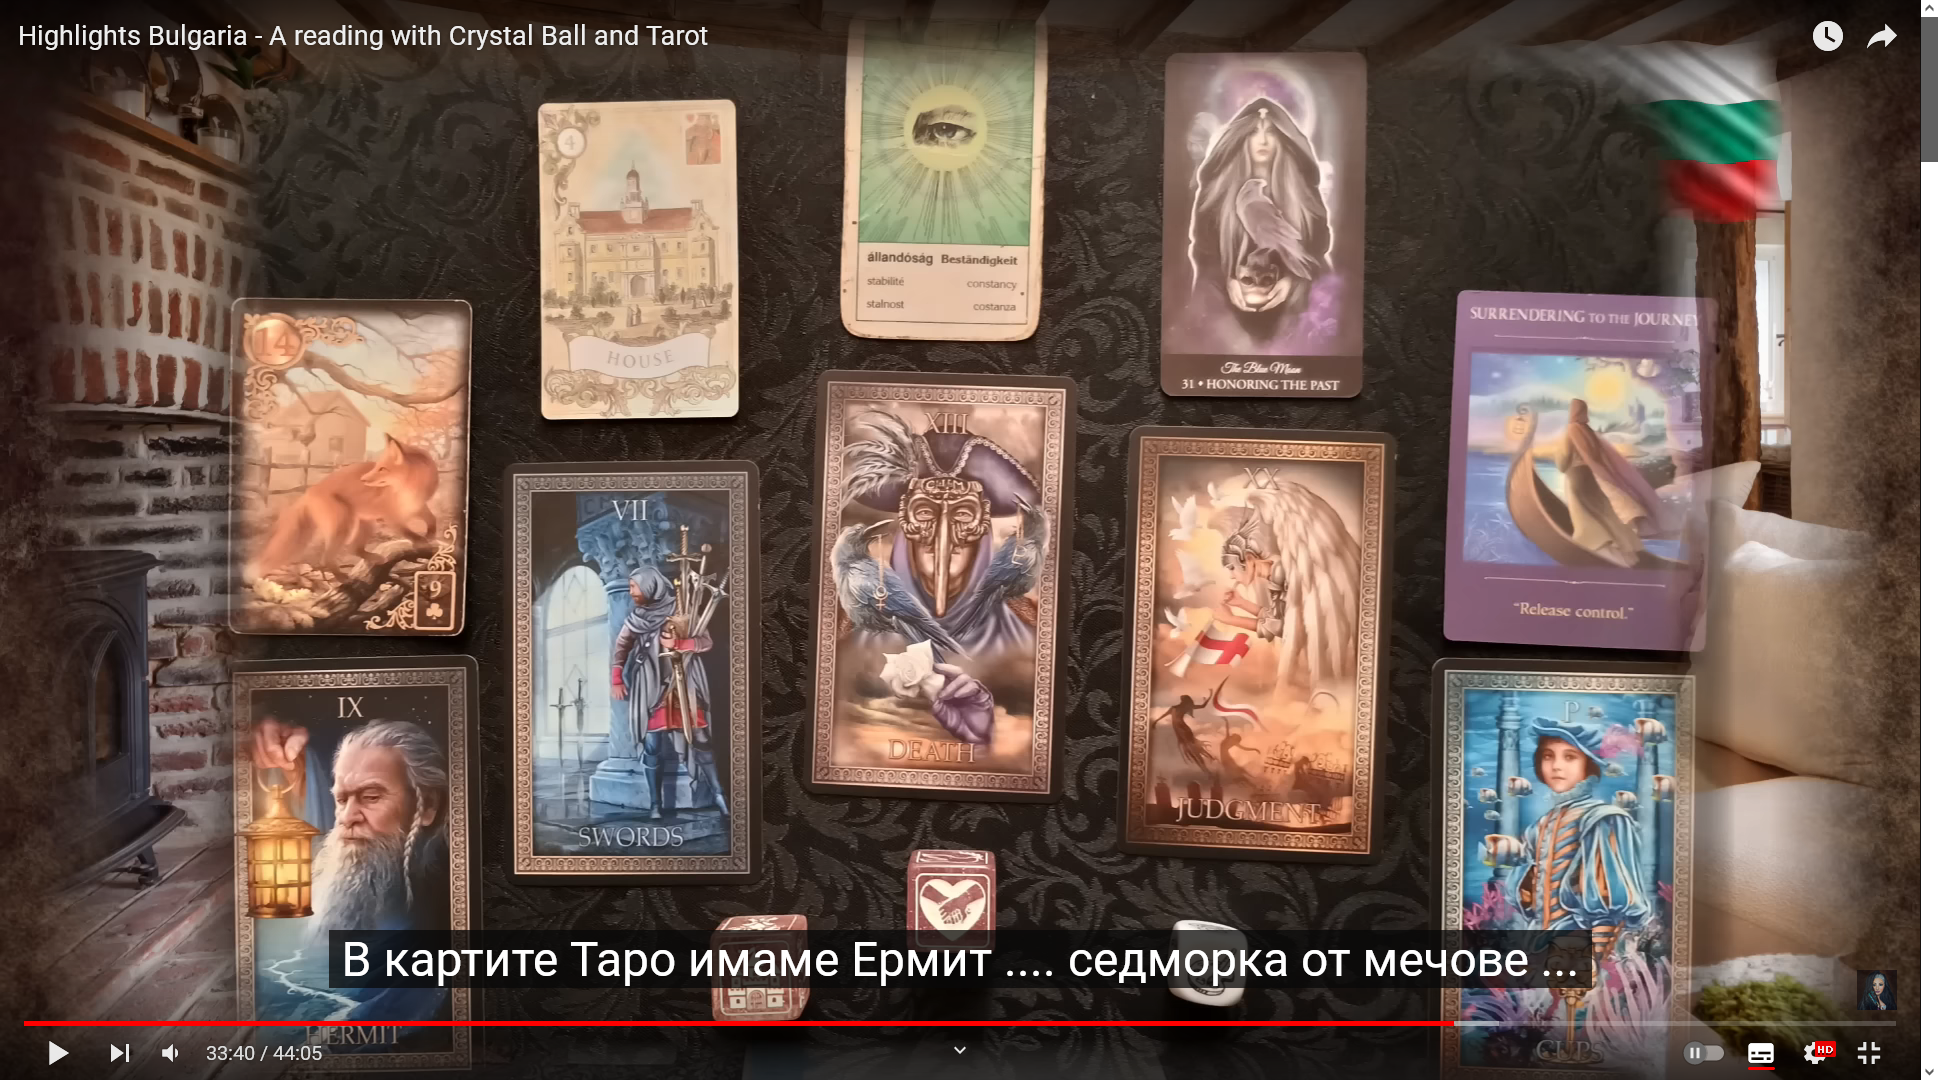 Screenshot 2024-02-27 at 02-43-26 Tucker Carlson and Vladimir Putin's documents - A reading with Tarot Cards.png